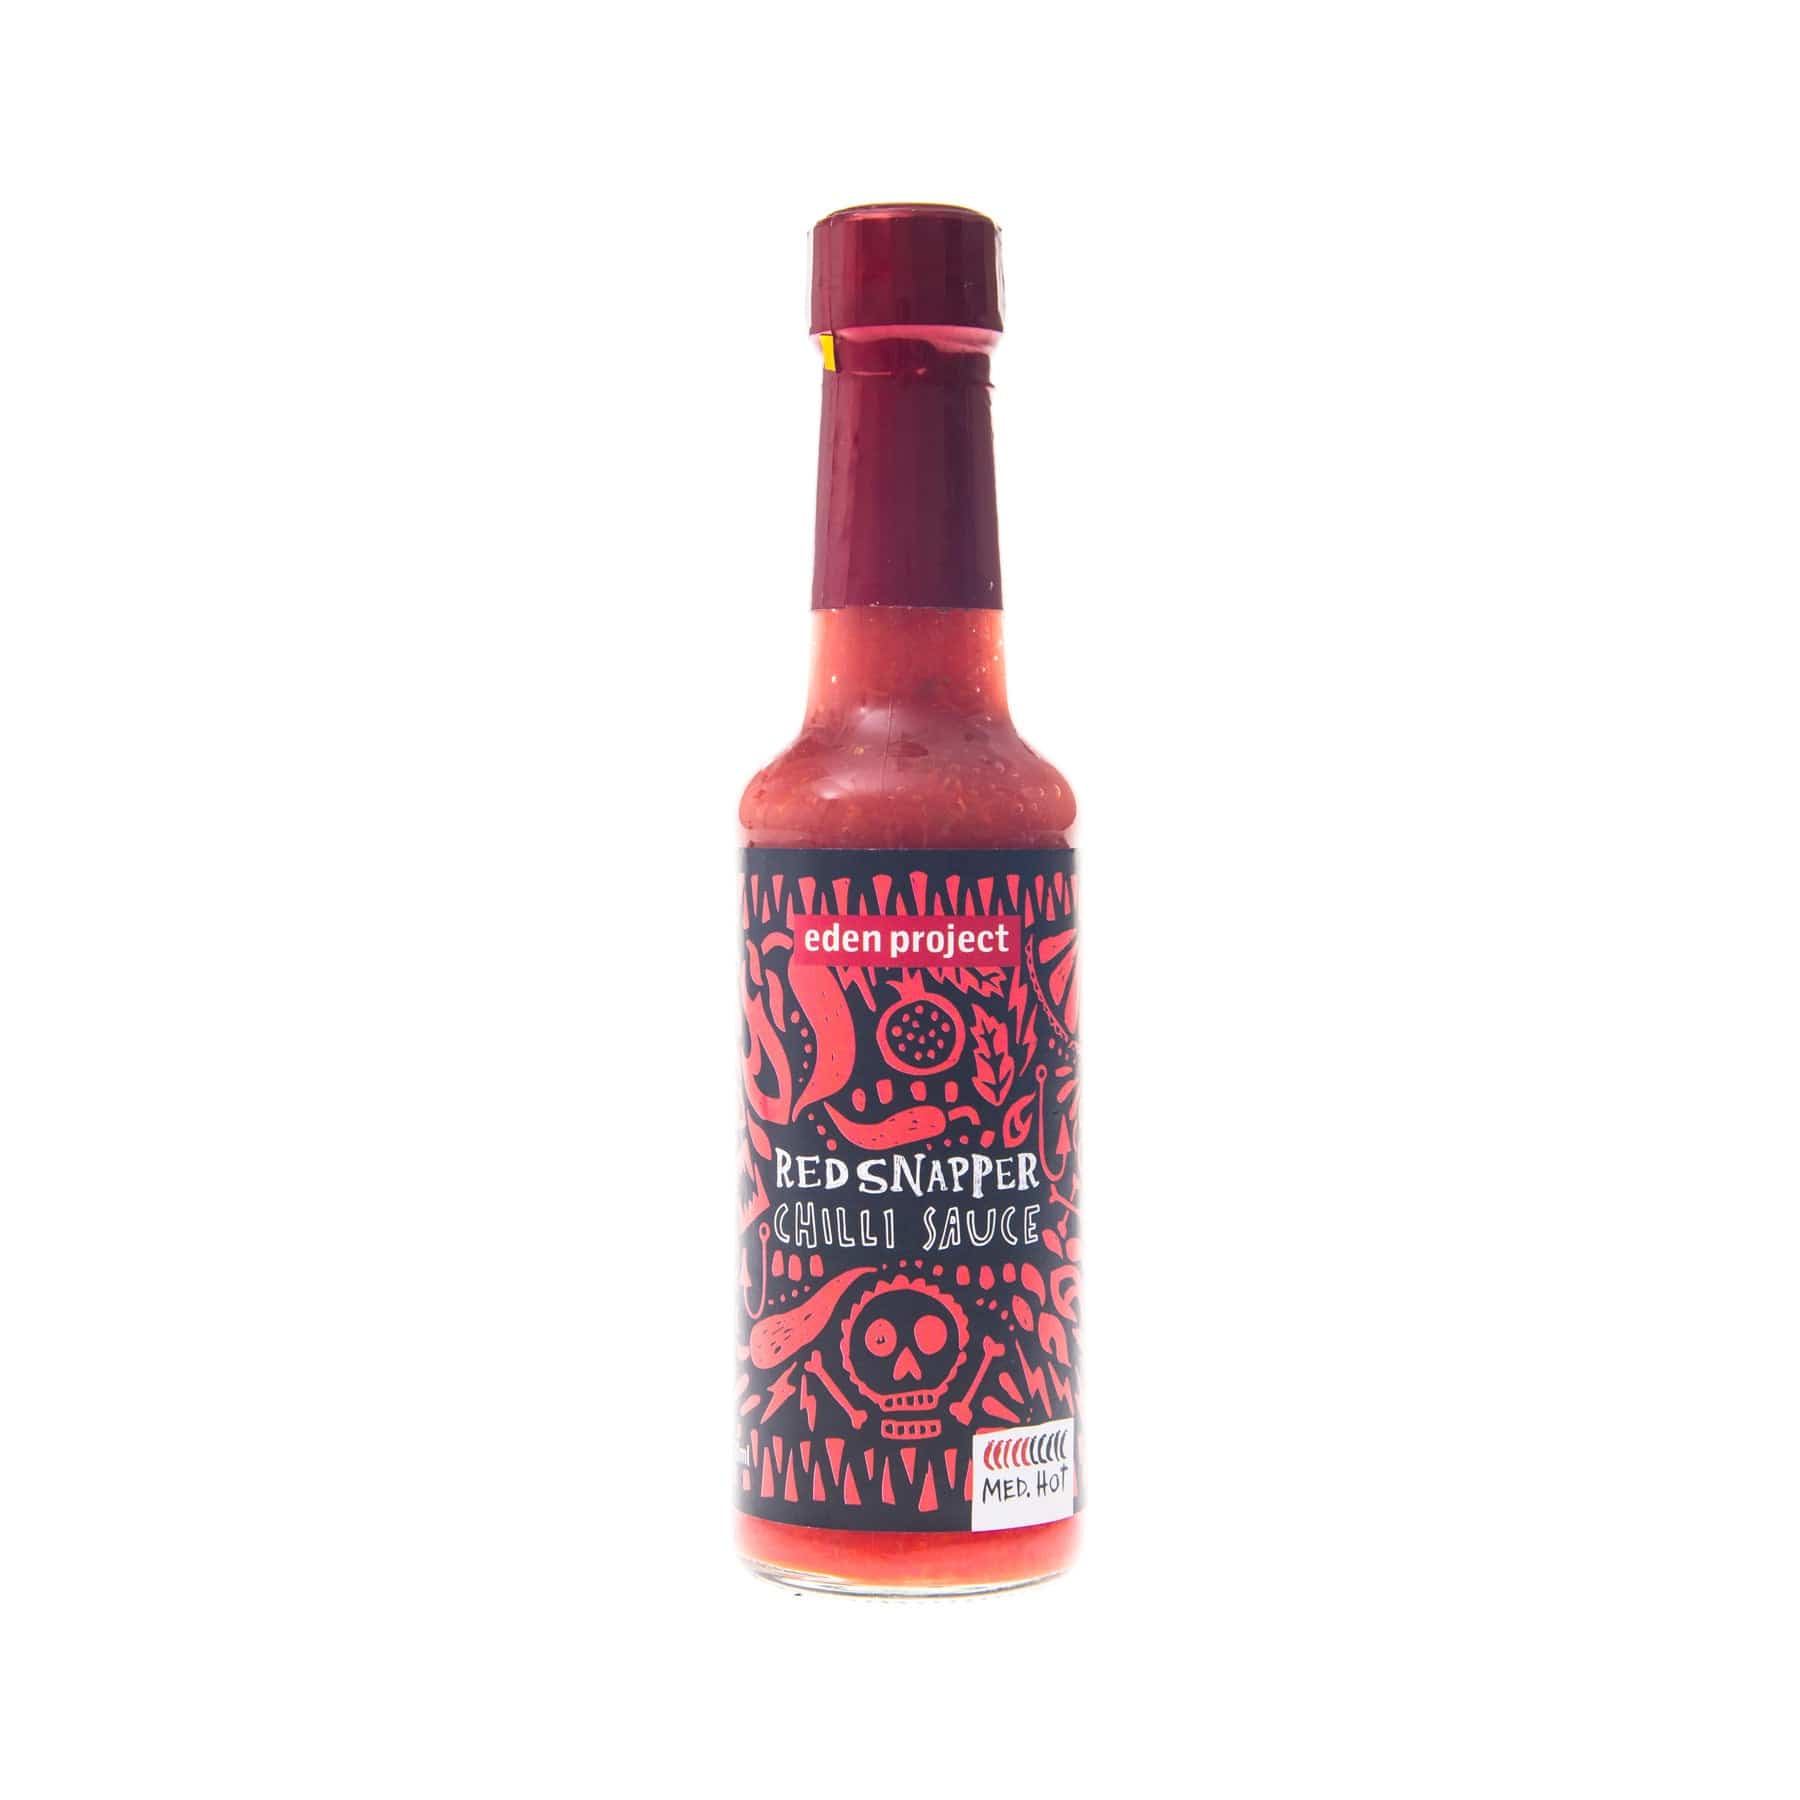 Red snapper chilli sauce 150ml